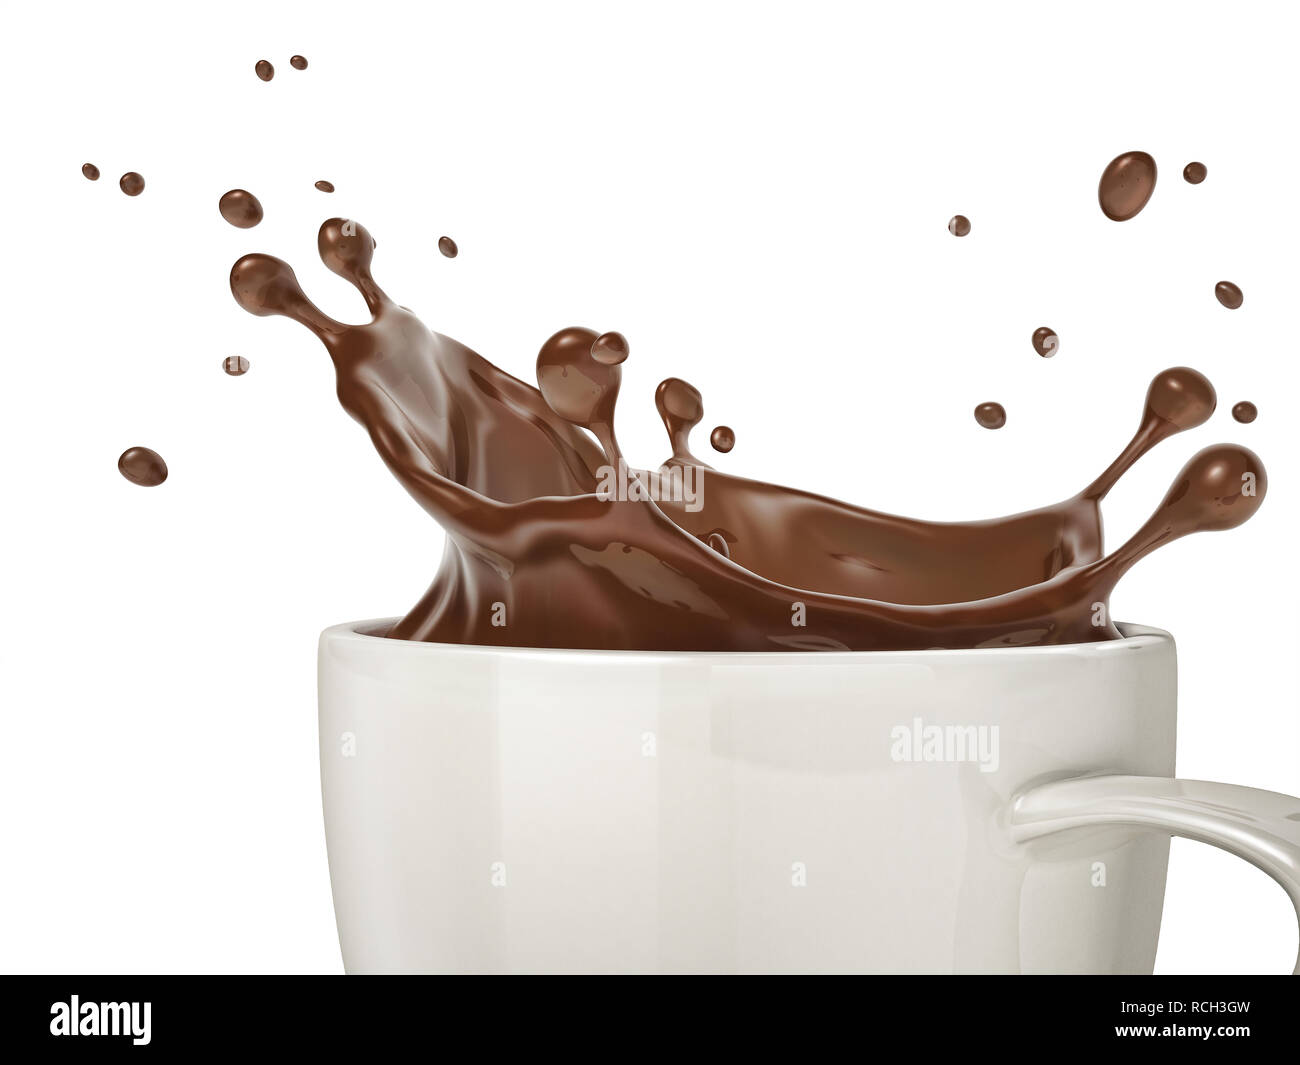 White cup with liquid chocolate splash. Close up view from side, on white background with clipping path included. Stock Photo